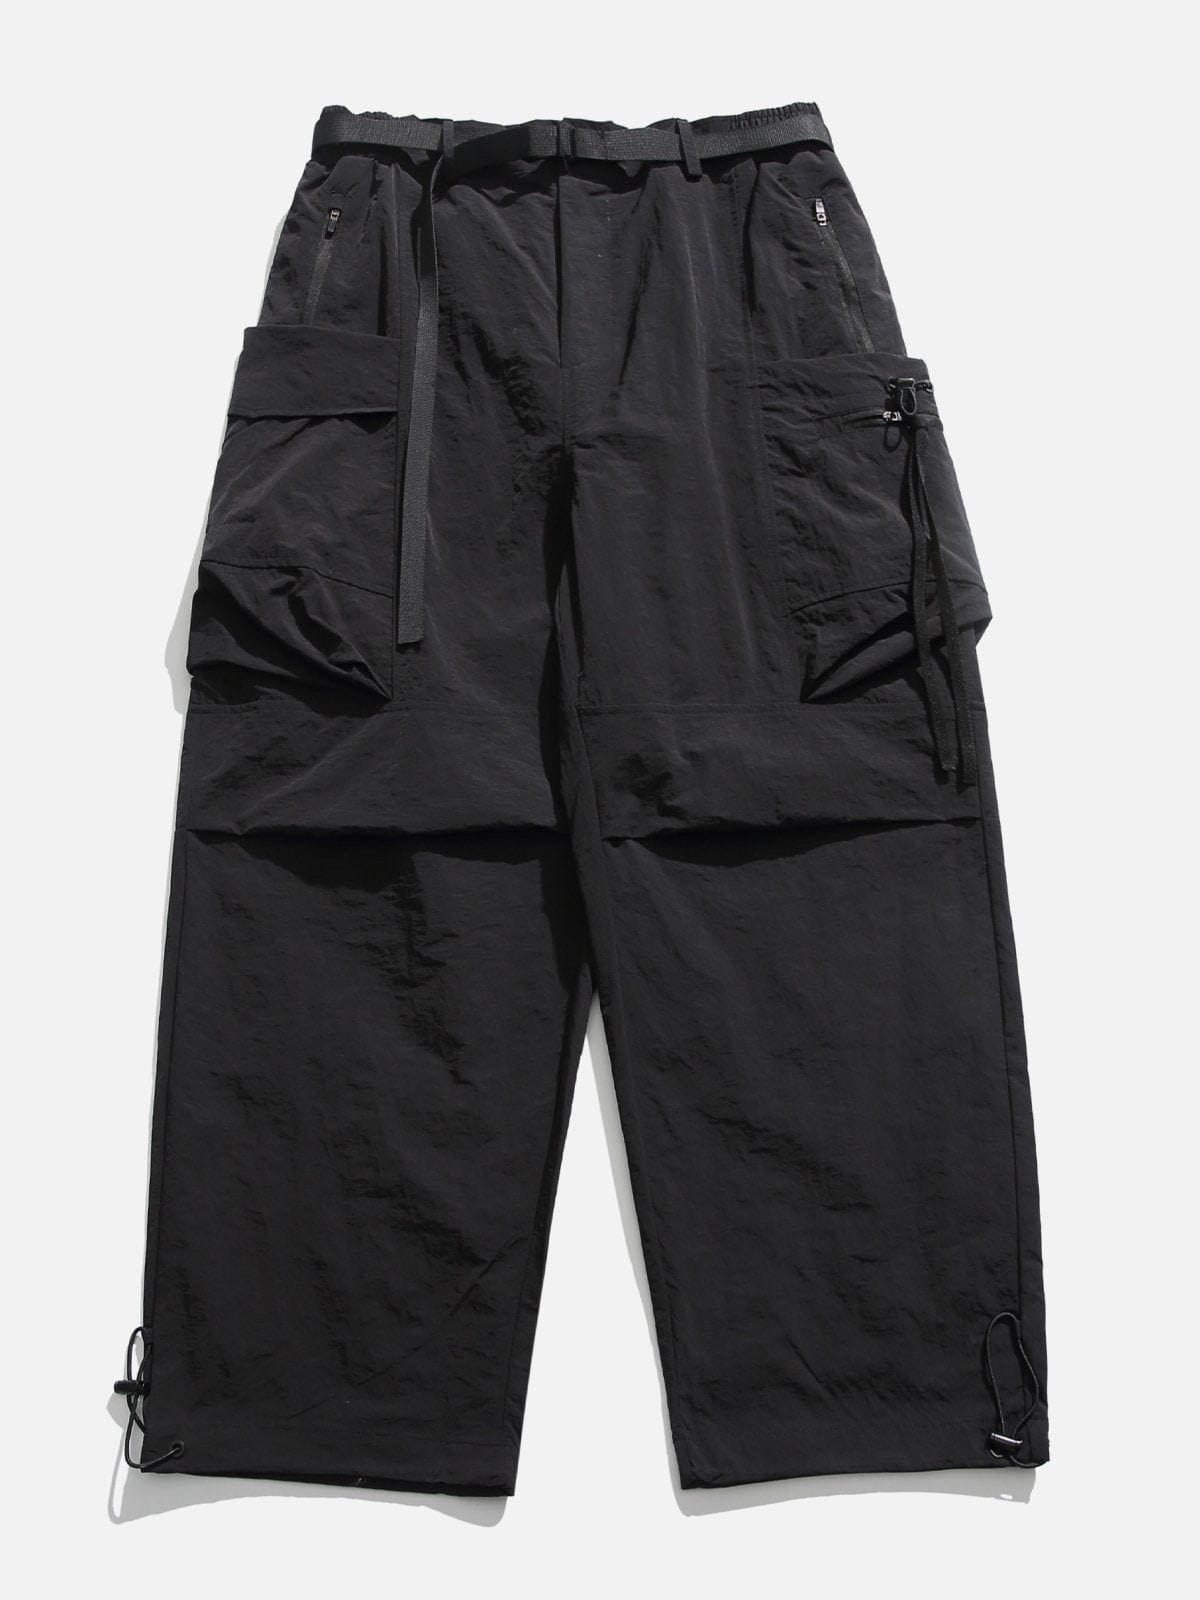 Sneakerland® - Large Pockets Pleated Cargo Pants